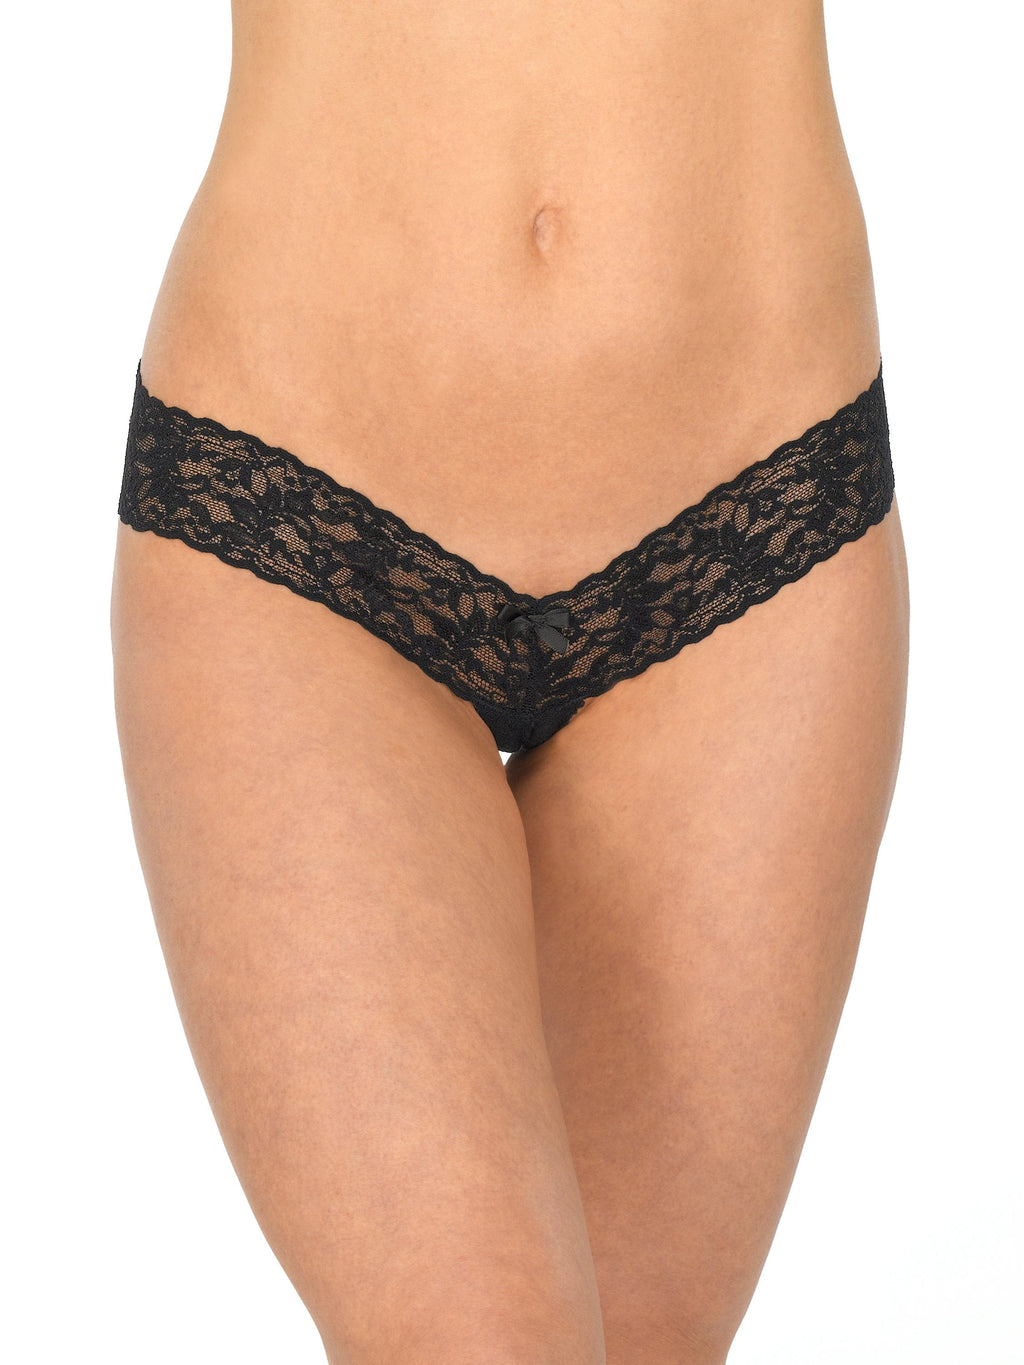 Women's Crotchless Lace Panties Pack (of 3), Snazzyway